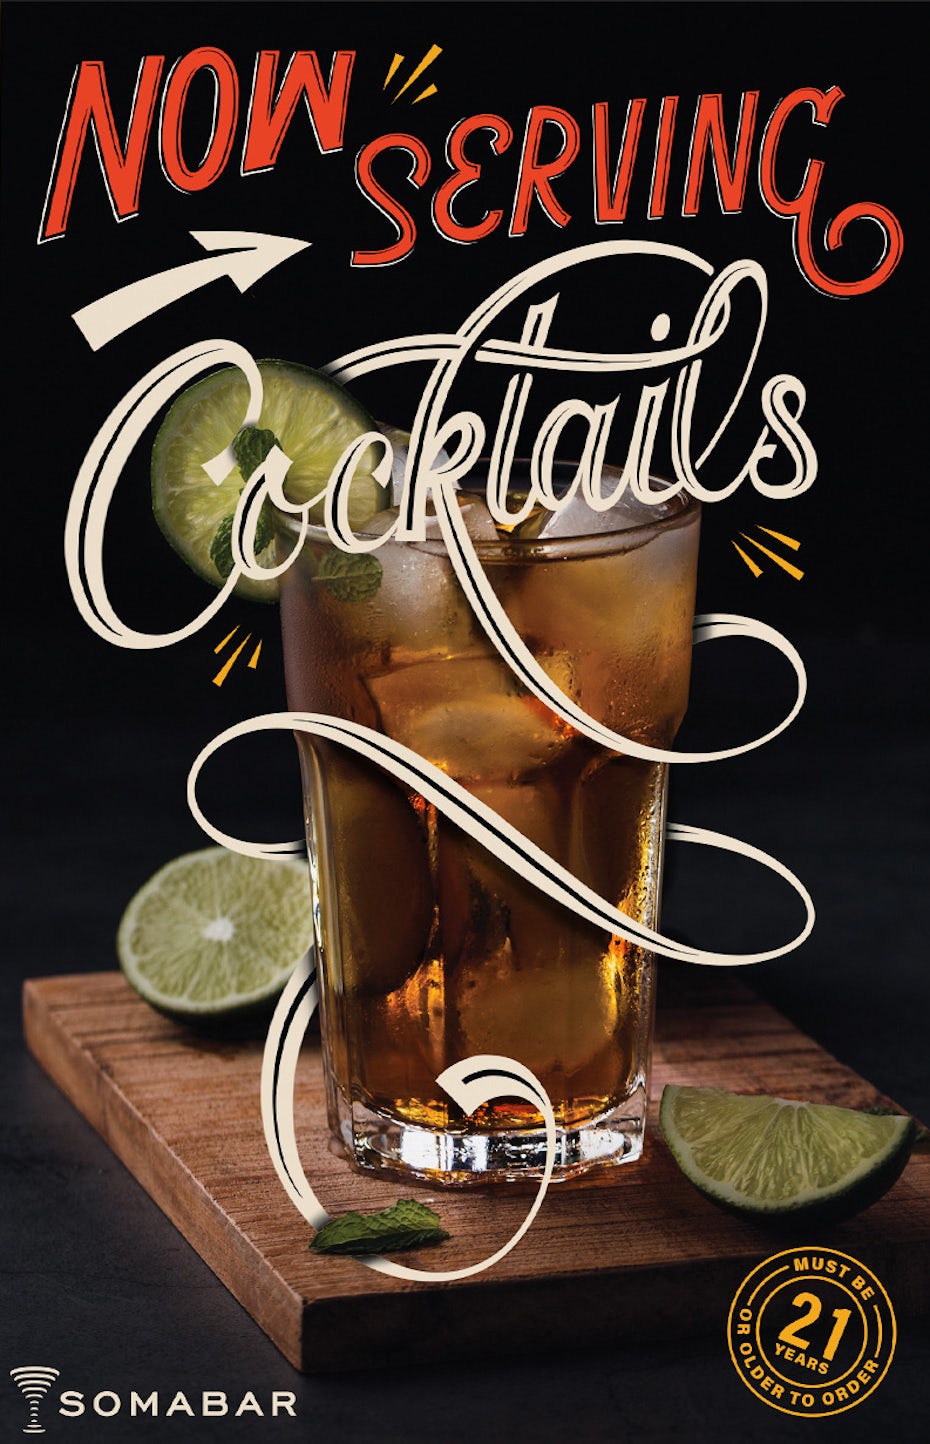 poster of a refreshing cocktail surrounded by cut limes